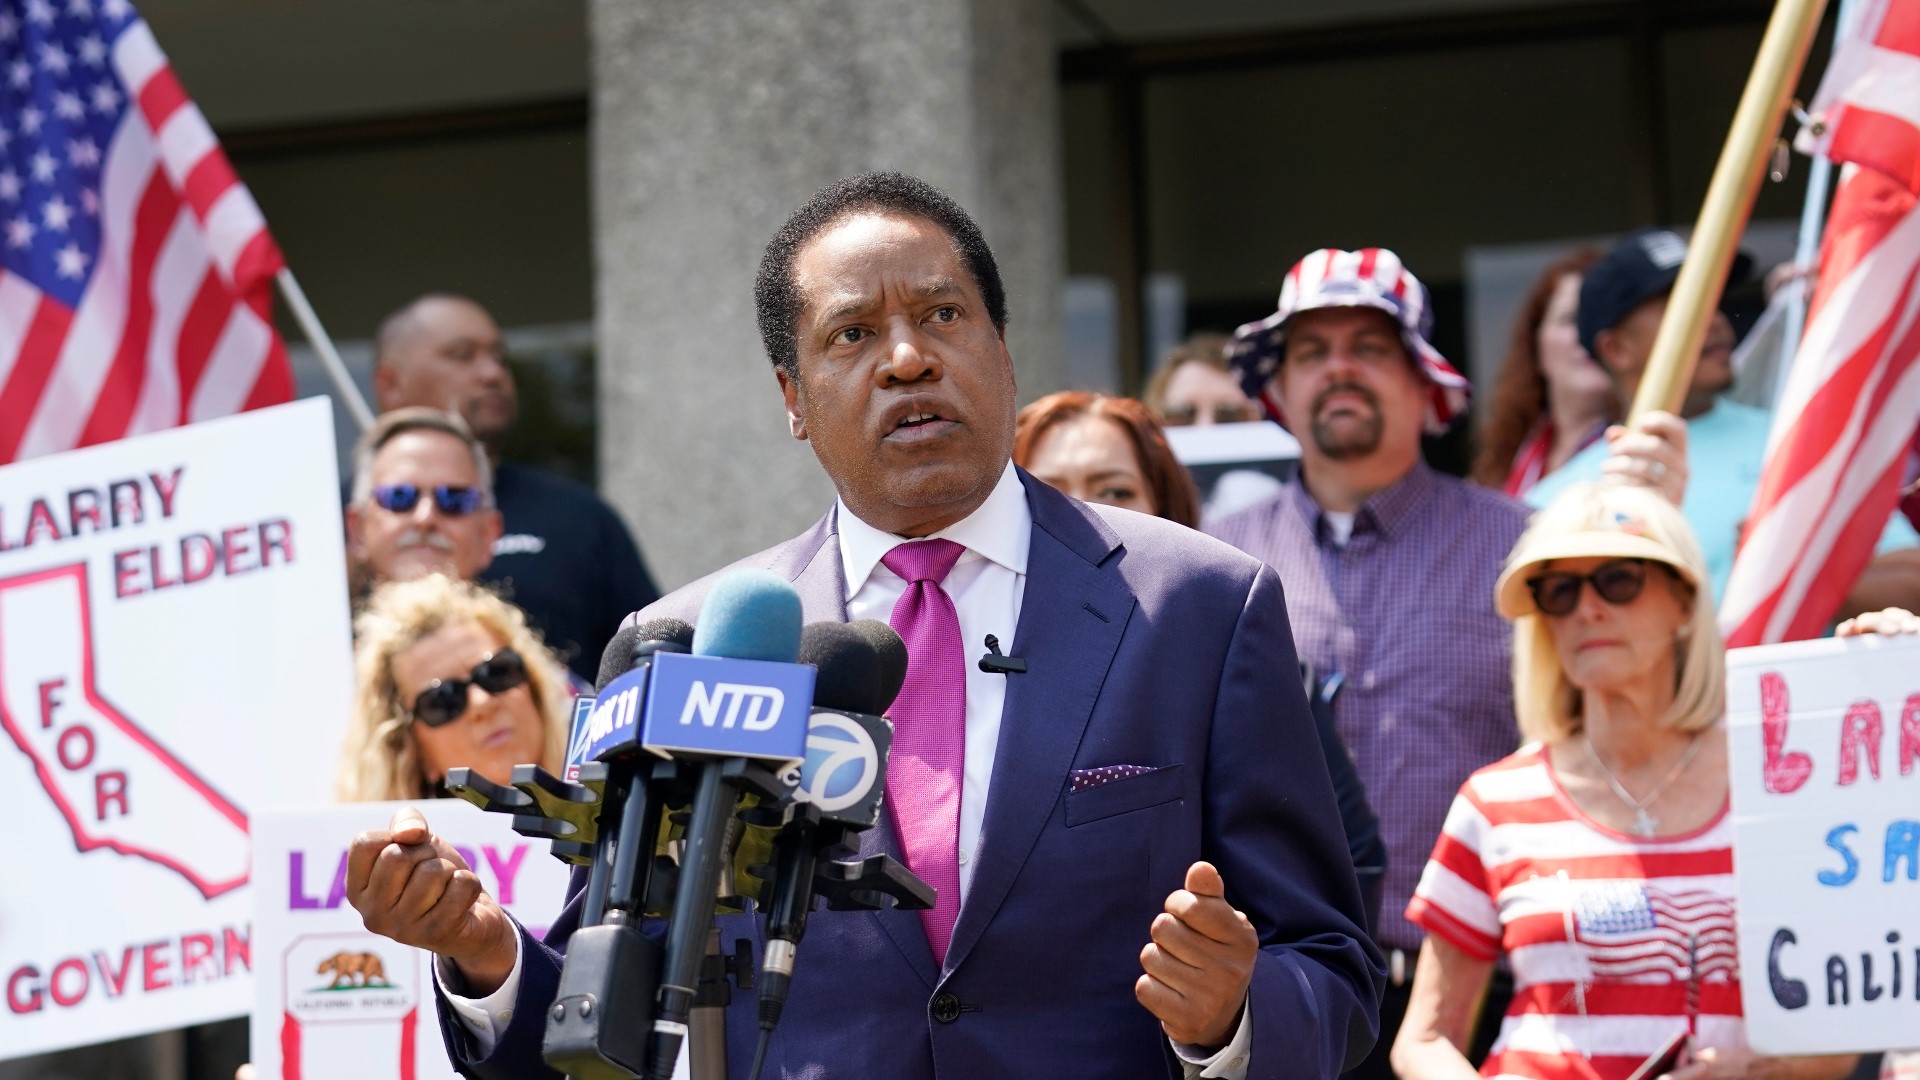 Larry Elder, a leader among the recall challengers, spoke to supporters after Gov. Newsom was projected to defeat the recall.